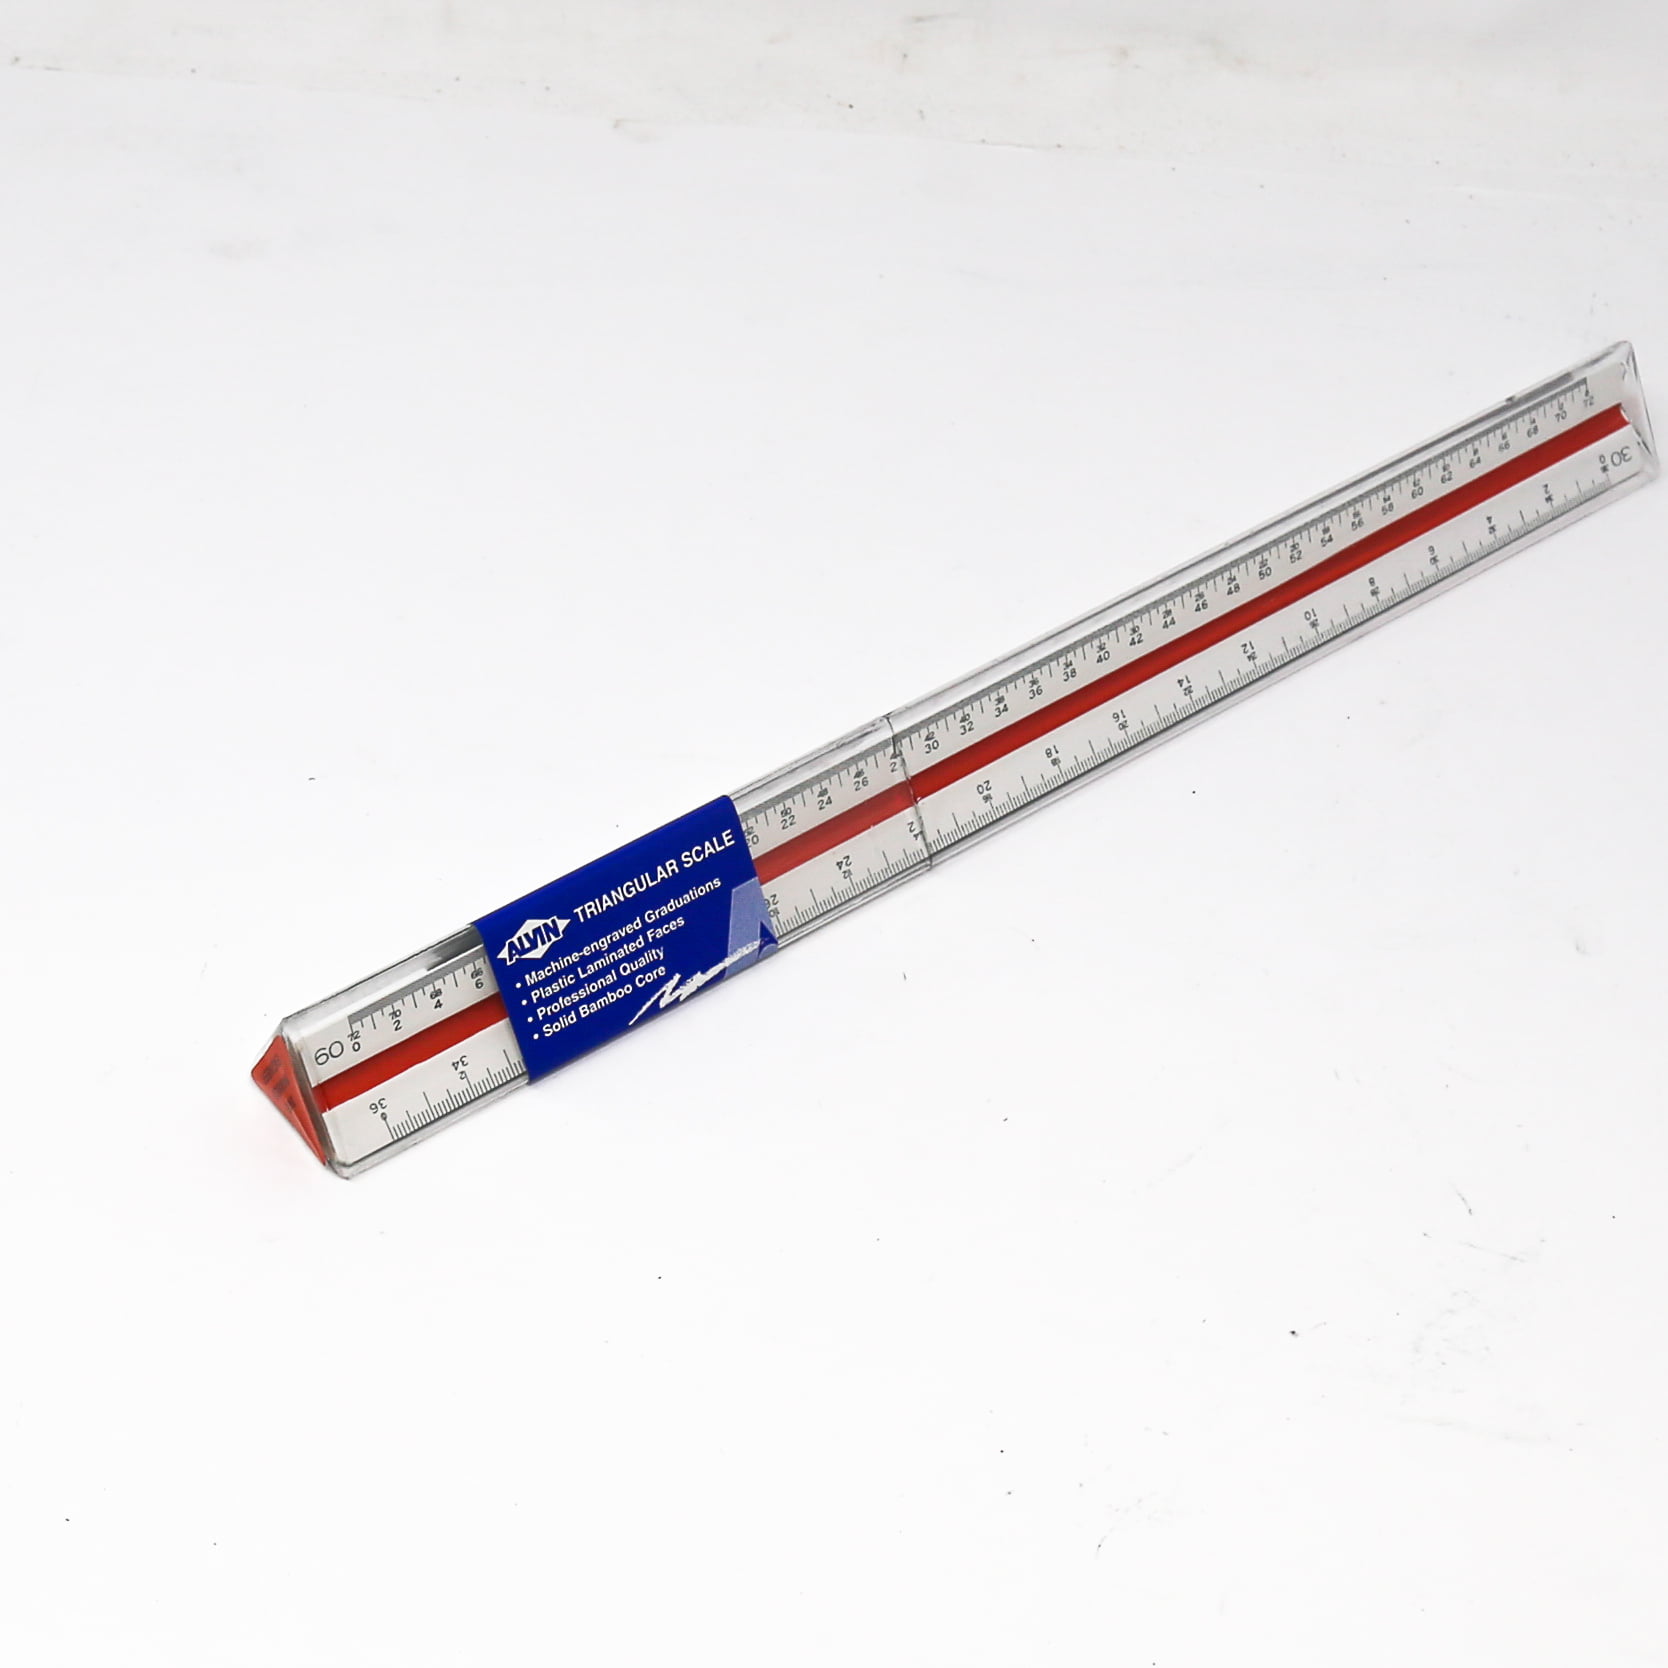 Stainless Steel 12 x 1-1/8 Inches Alvin Imperial and Metric Ruler 